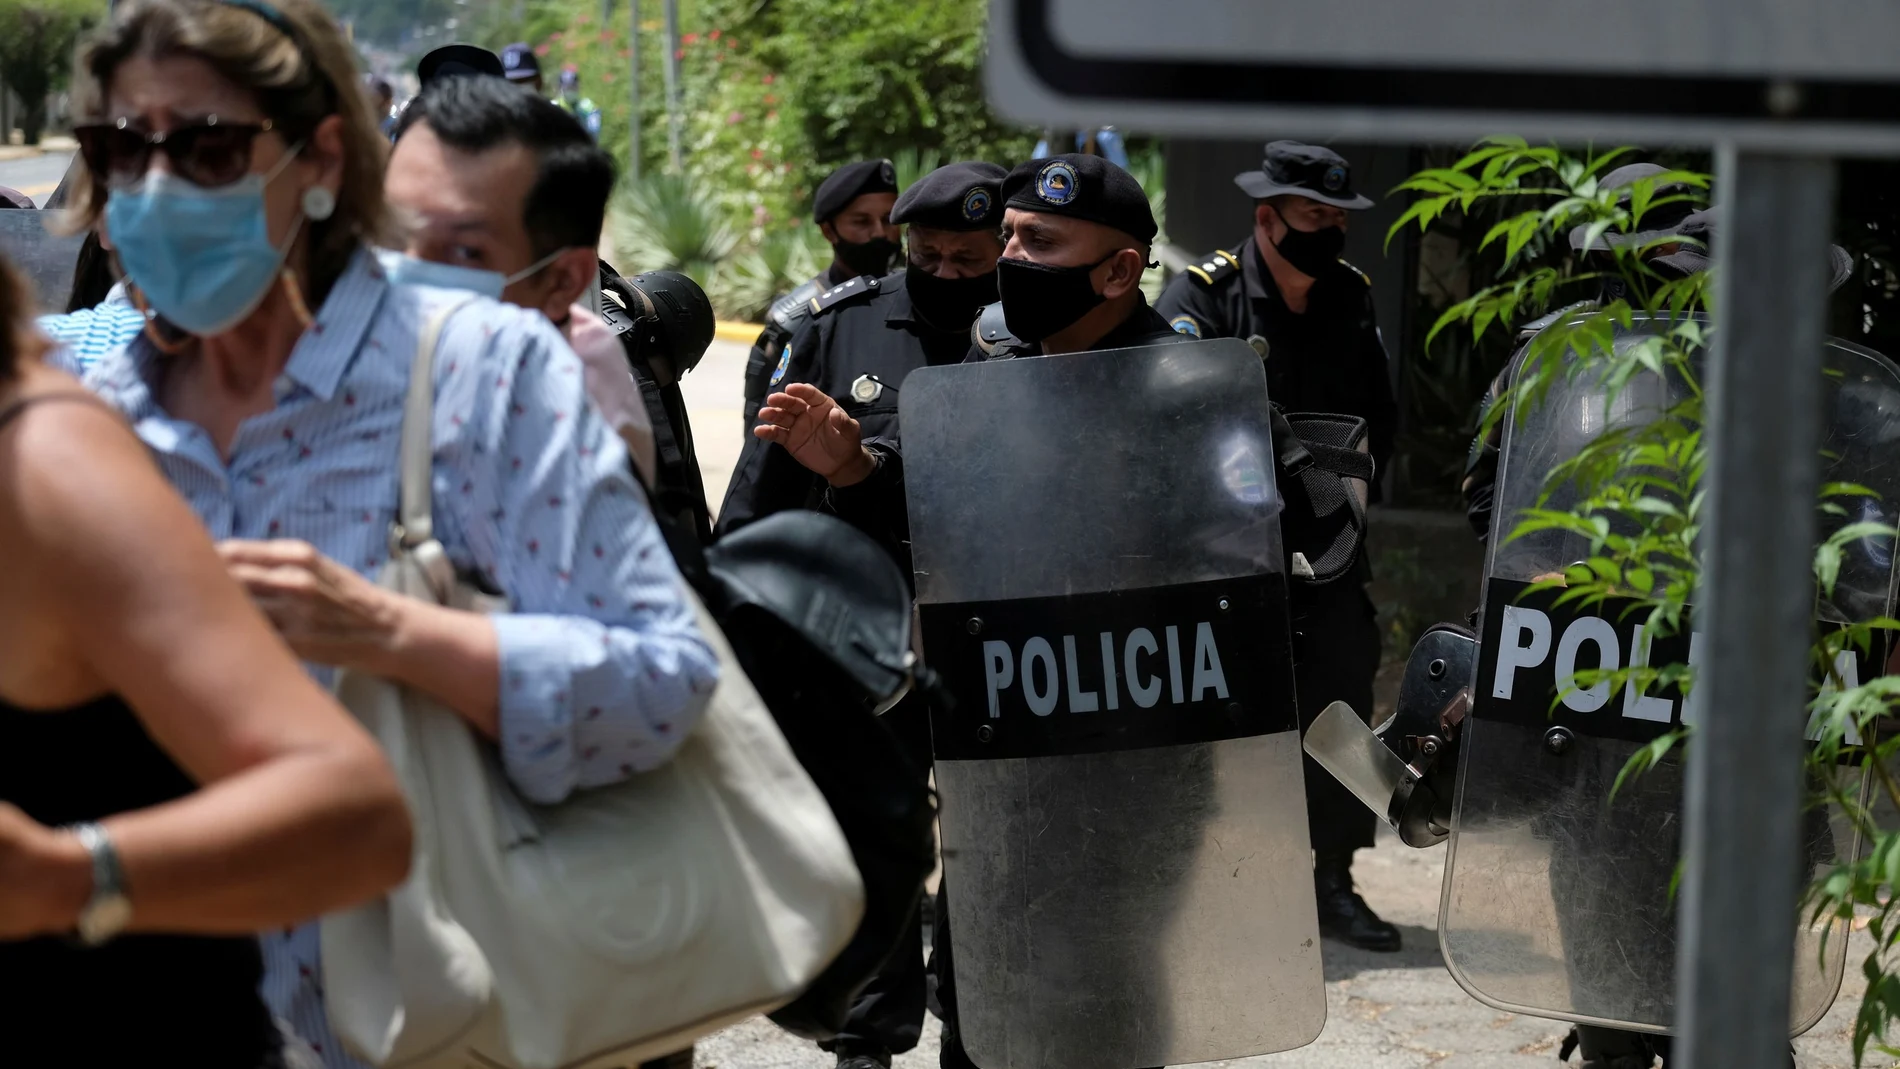 Nicaraguan police officers move journalists from the entrance to the house of opposition leader Cristiana Chamorro after prosecutors sought her arrest for money laundering and other crimes, according to judicial authorities, in Managua, Nicaragua June 2, 2021. REUTERS/Carlos Herrera